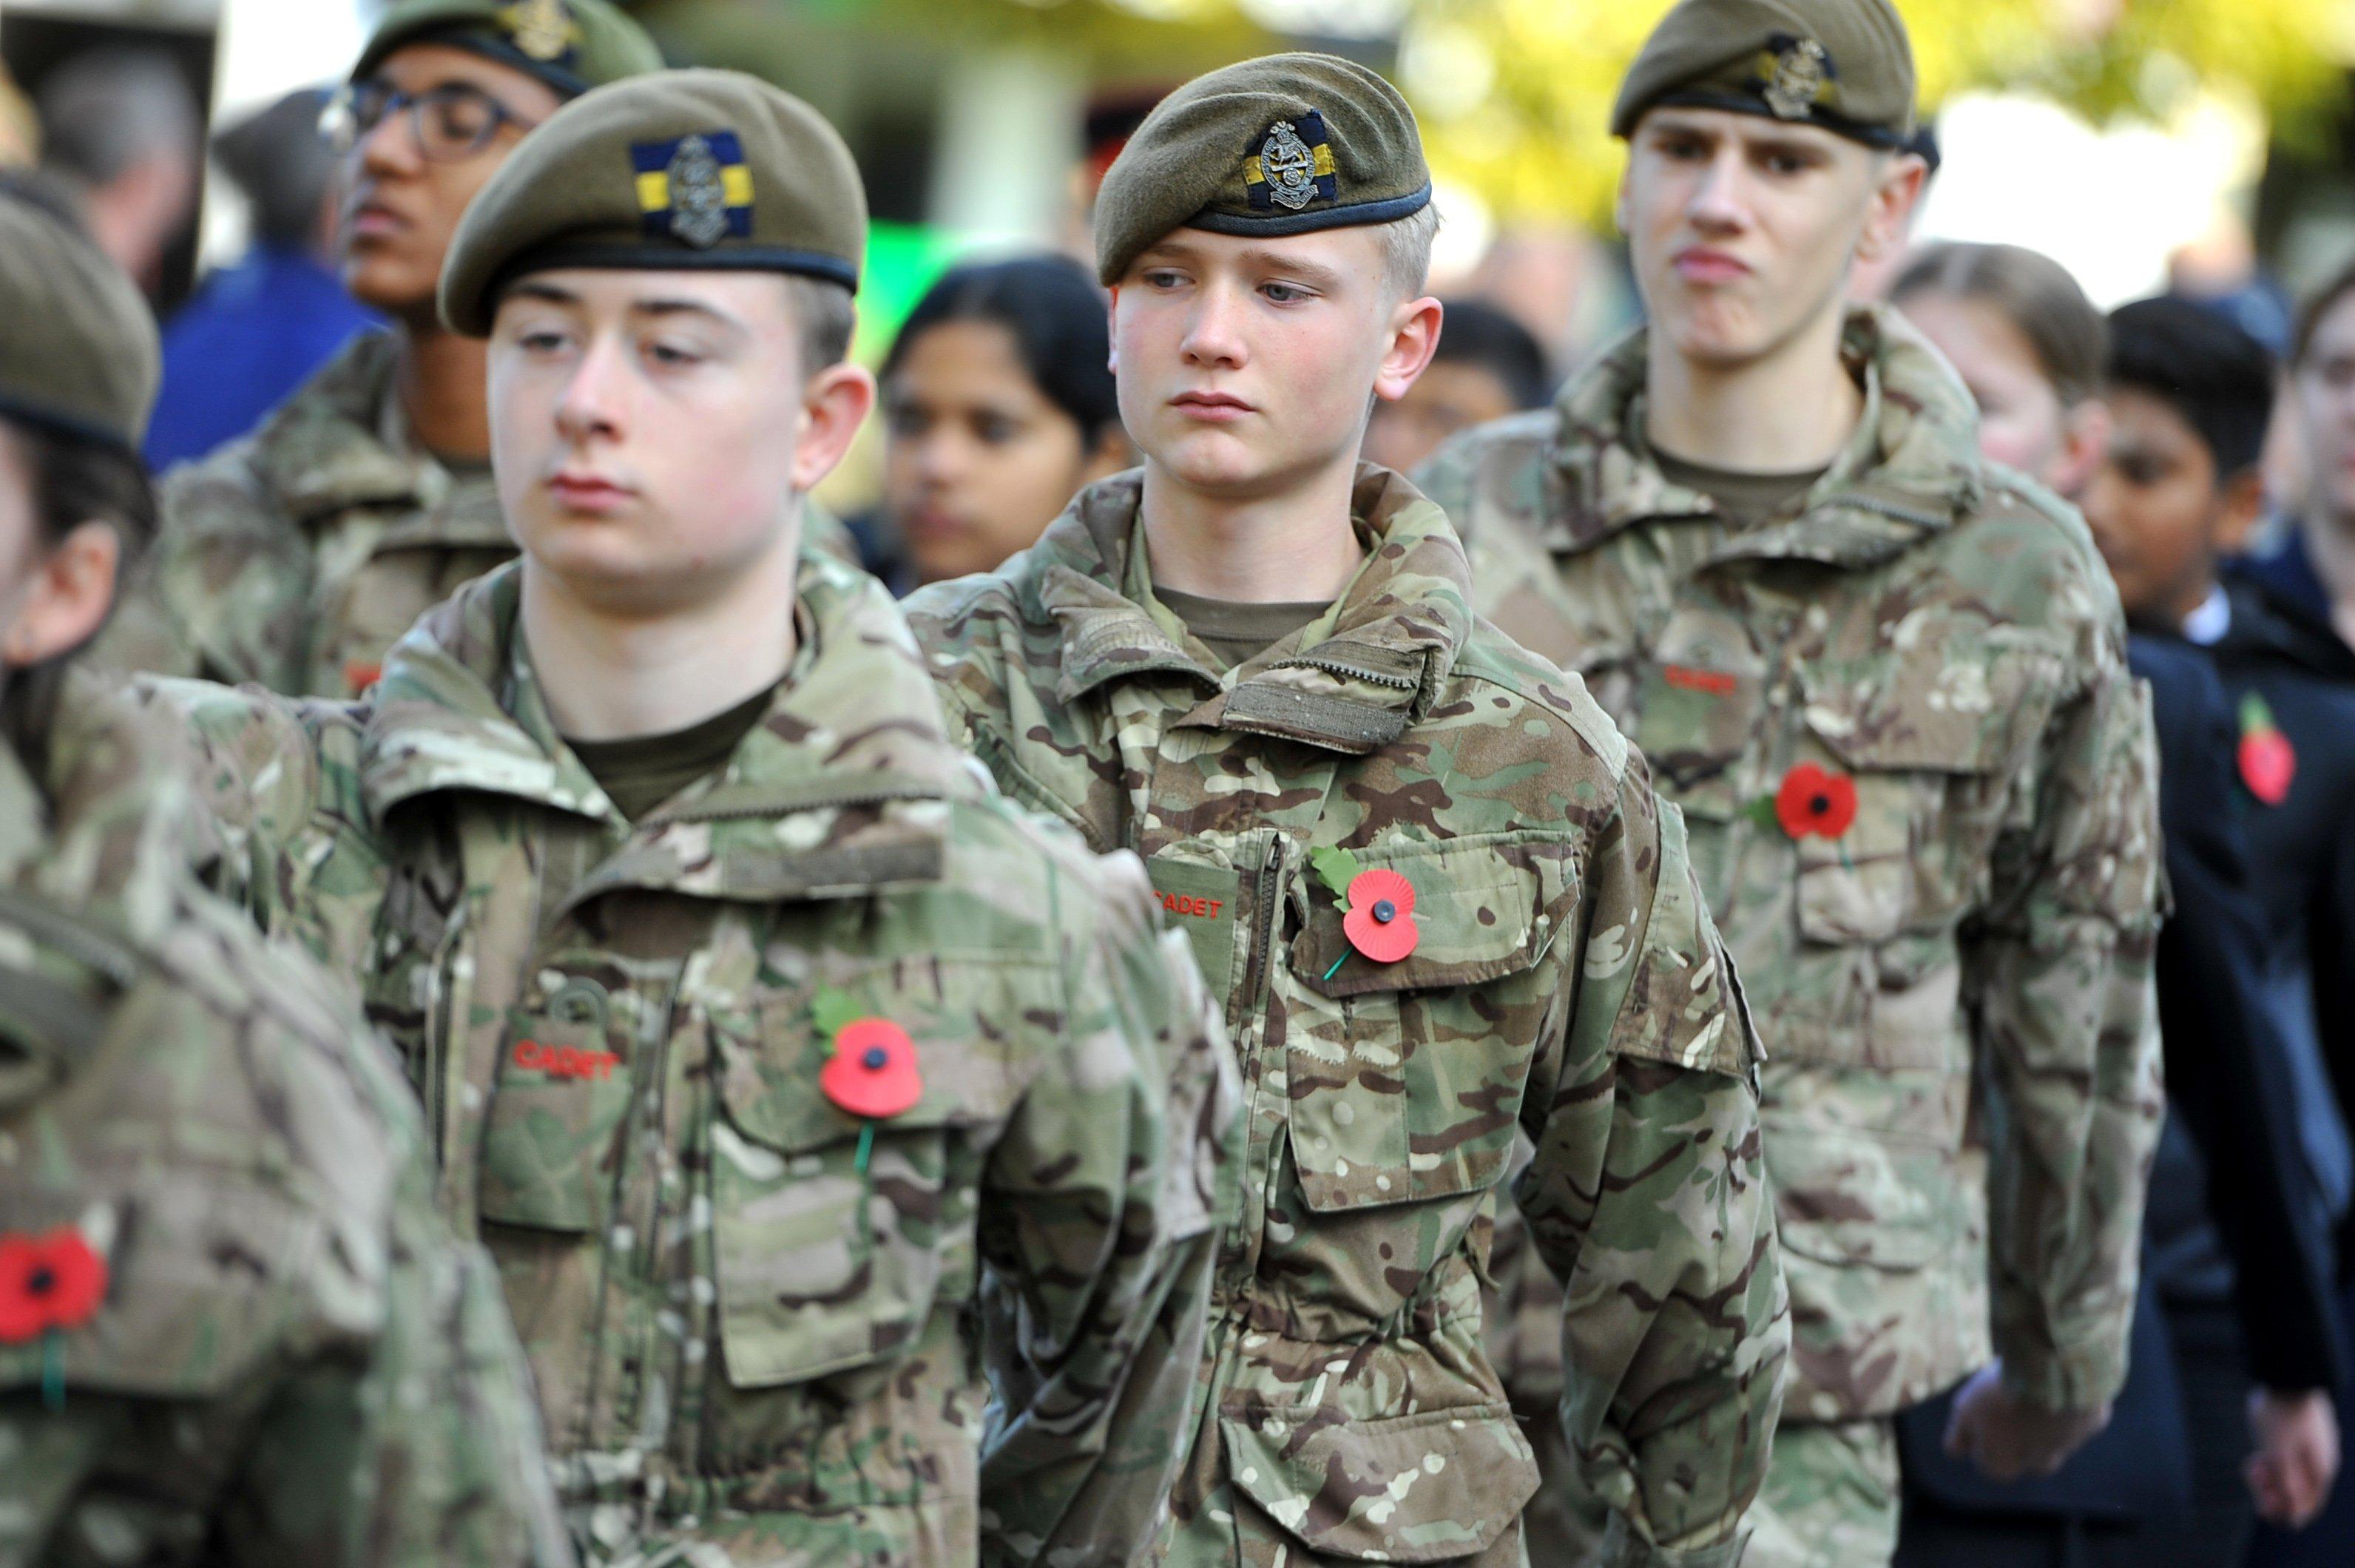 In Pictures: Remembrance Sunday 2019 in Horsham | SussexWorld